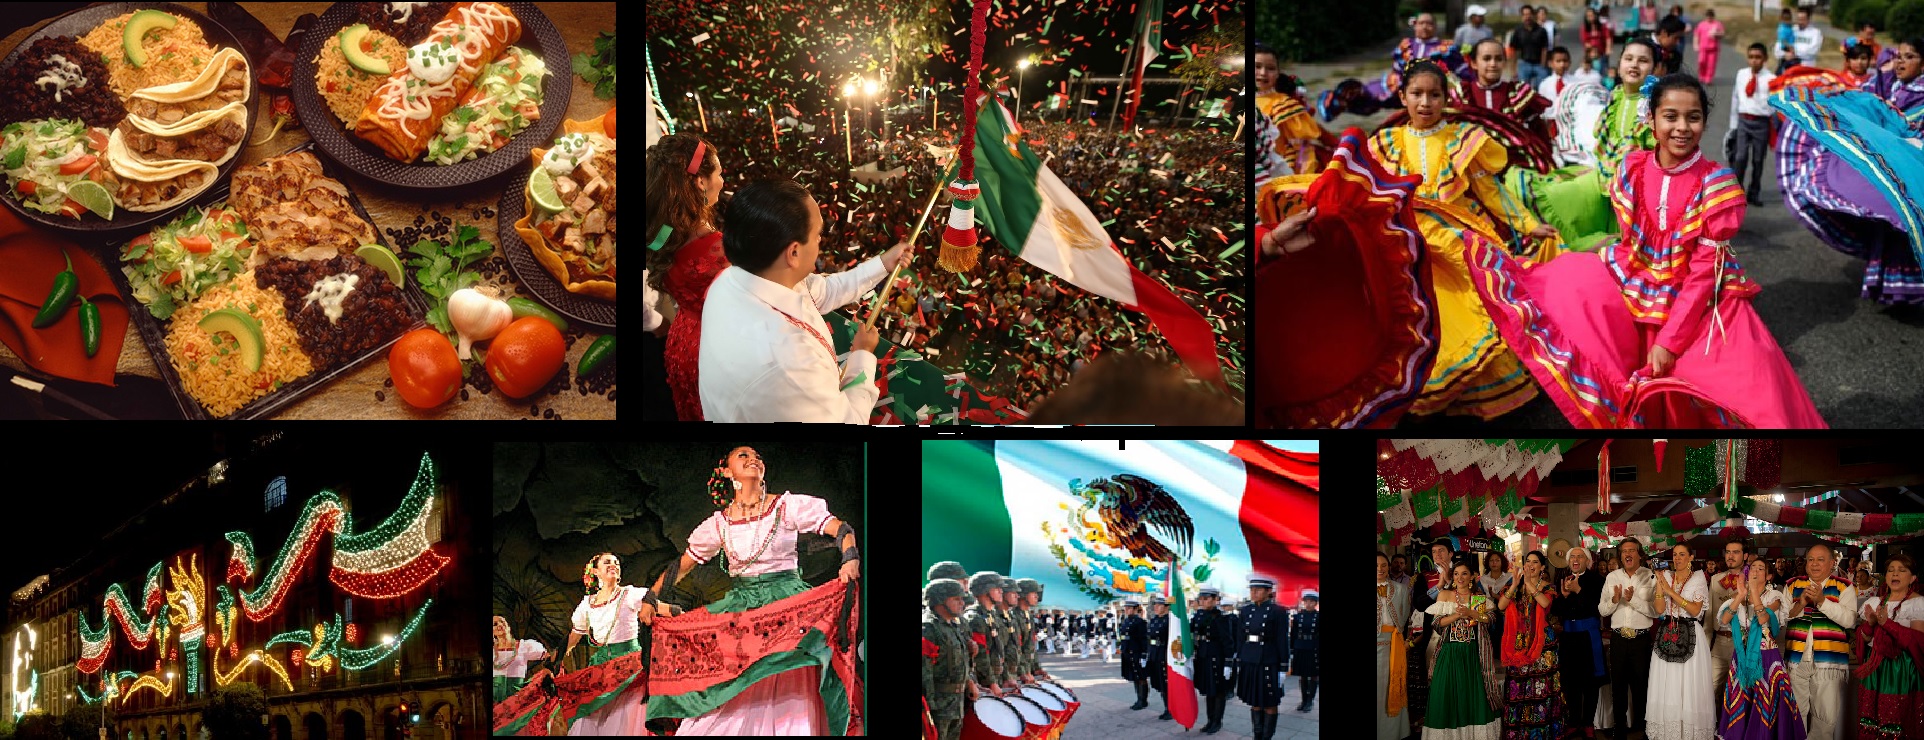 Grito - Mexican Independence Day